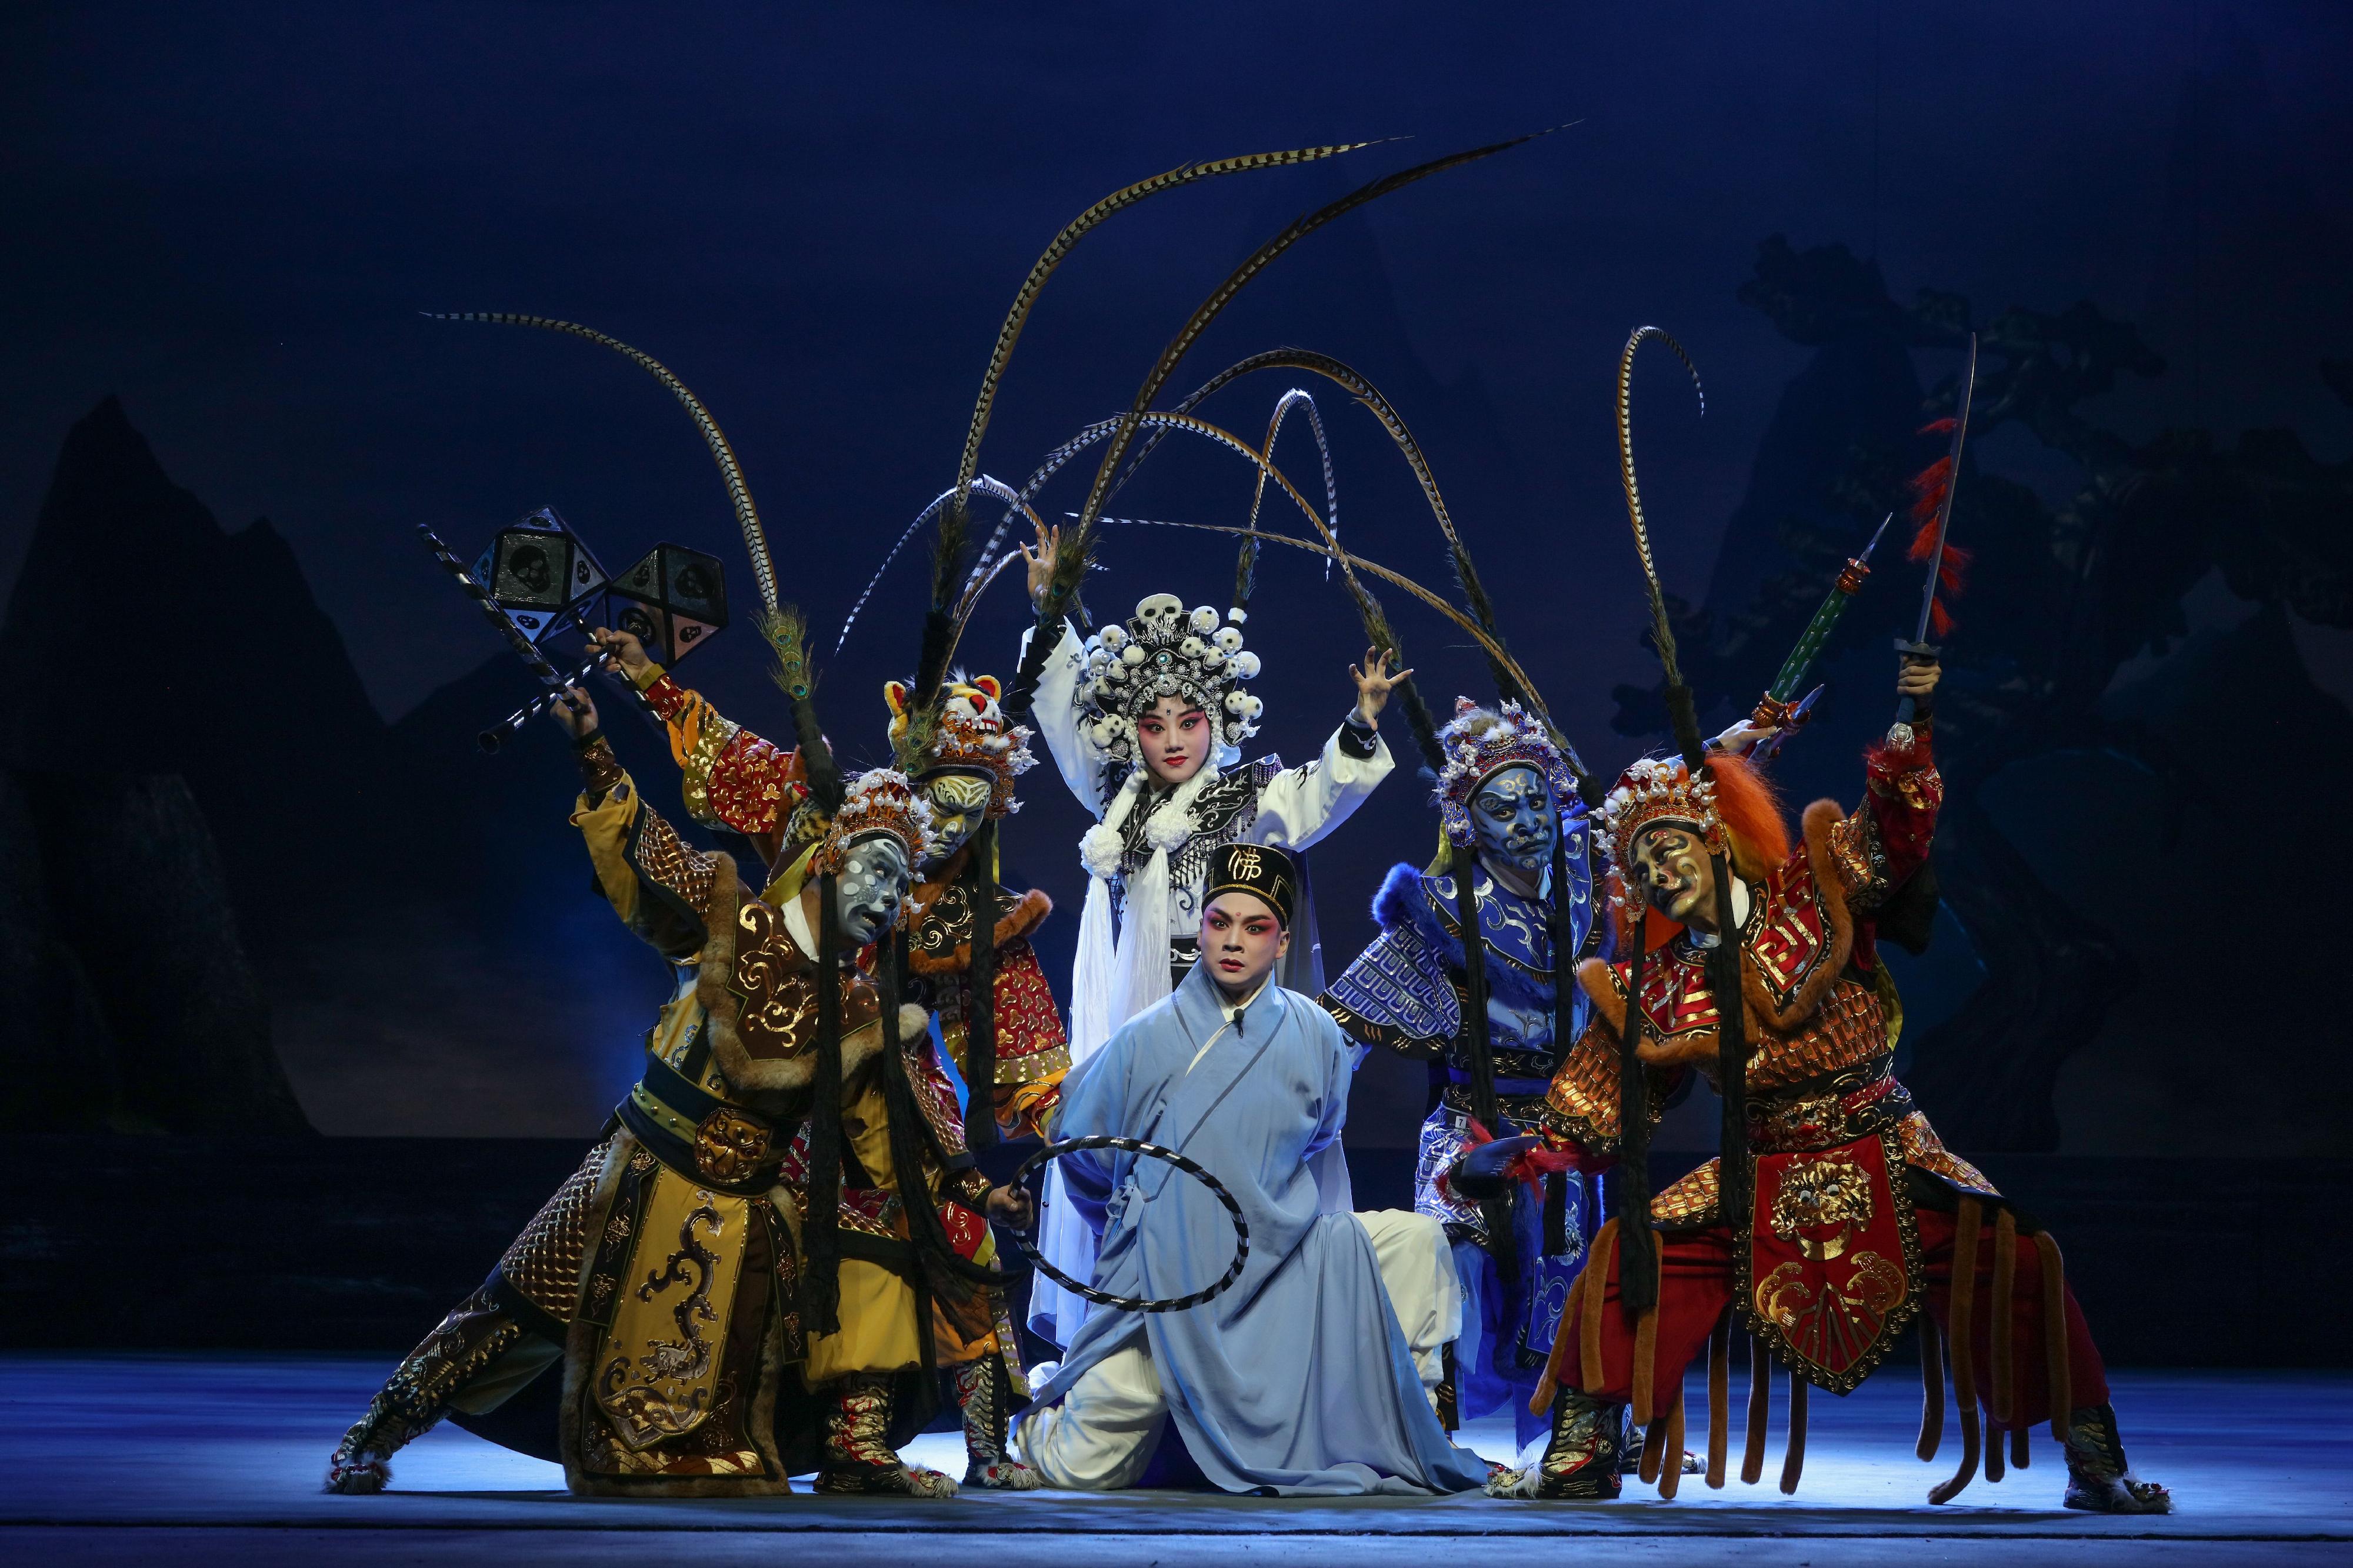 The Zhejiang Wu Opera Research Centre will return to Hong Kong to stage three Wu opera performances in late July at the inaugural Chinese Culture Festival, organised by the Leisure and Cultural Services Department. Photo shows a scene from "Sun Wu Kong Thrice Beat the Bony Demon".
